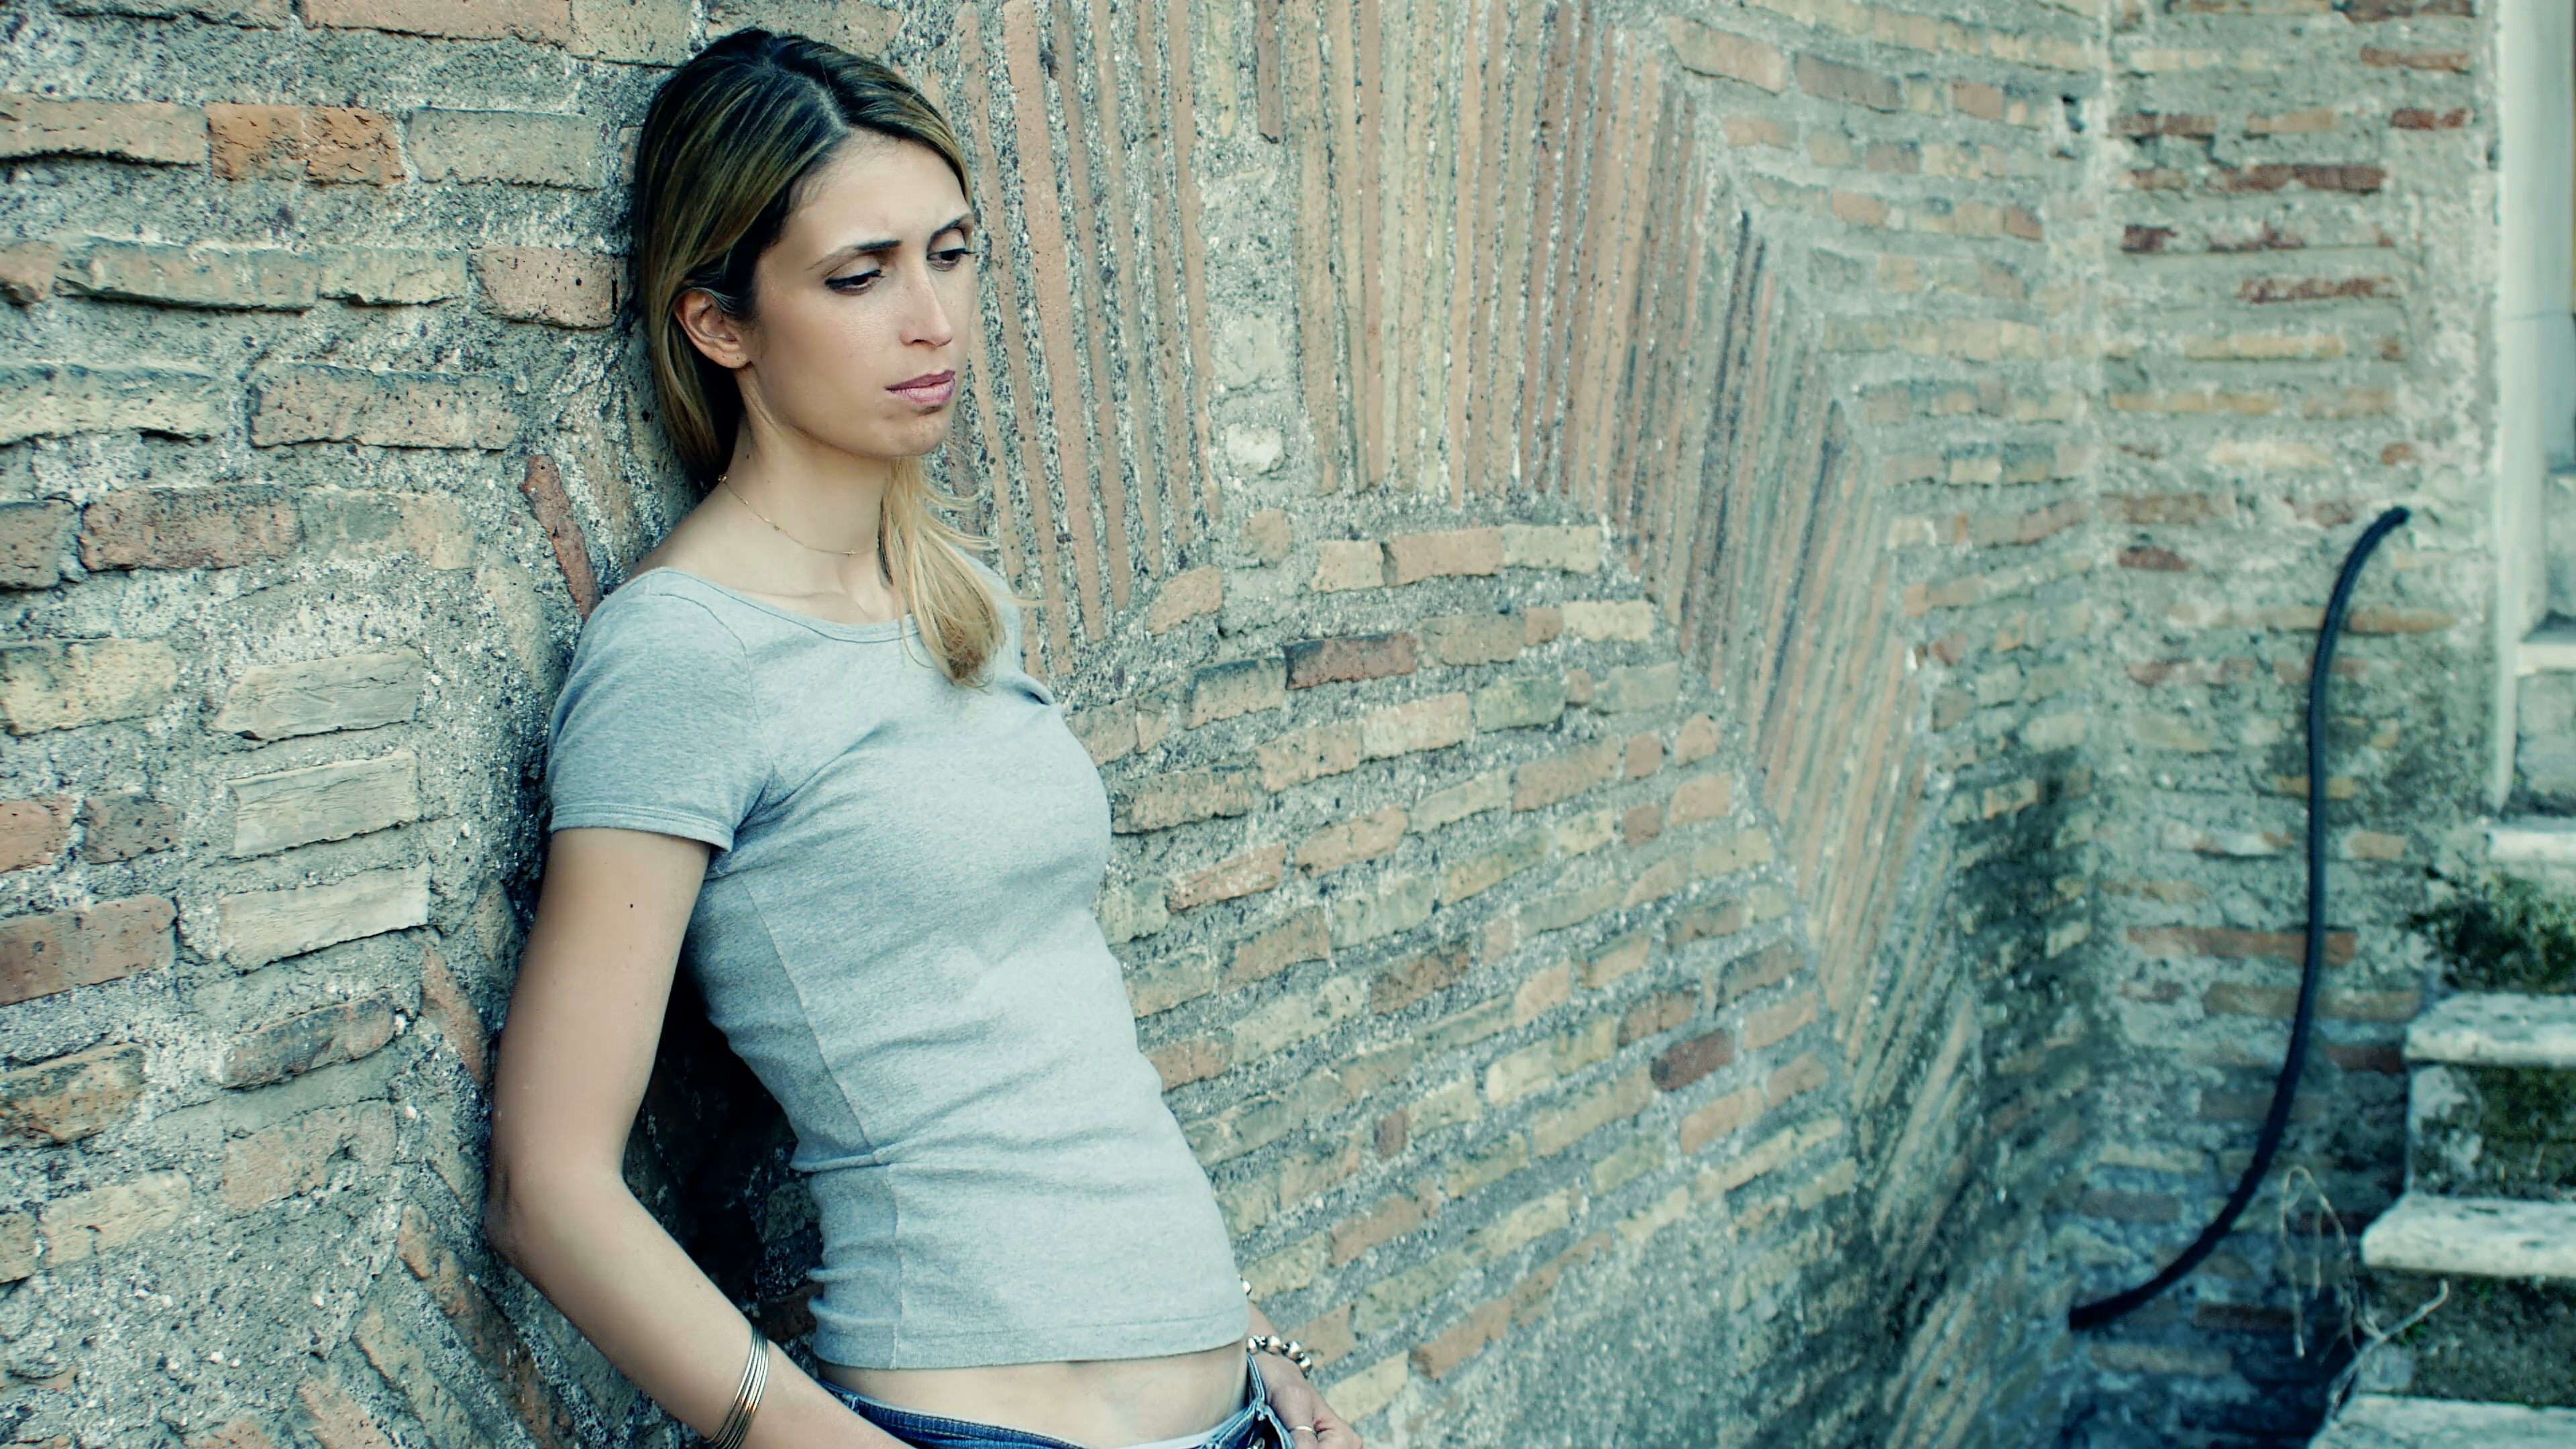 girl sad and pensive leaning against the wall: loneliness, anxiety ...